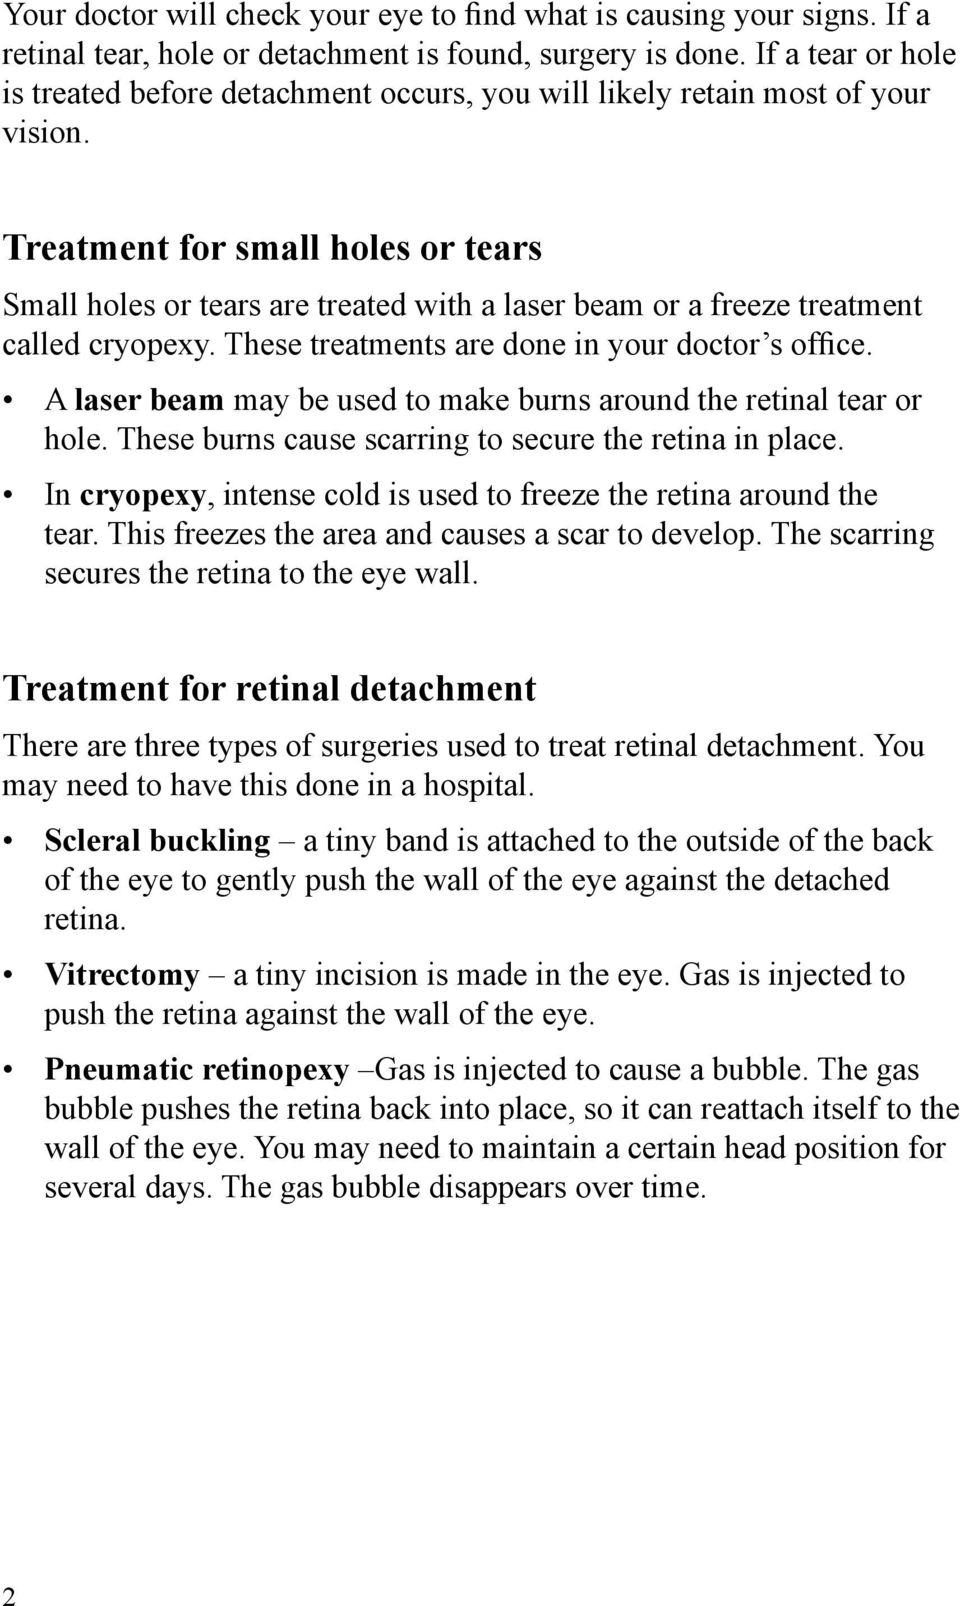 Treatment for small holes or tears Small holes or tears are treated with a laser beam or a freeze treatment called cryopexy. These treatments are done in your doctor s office.